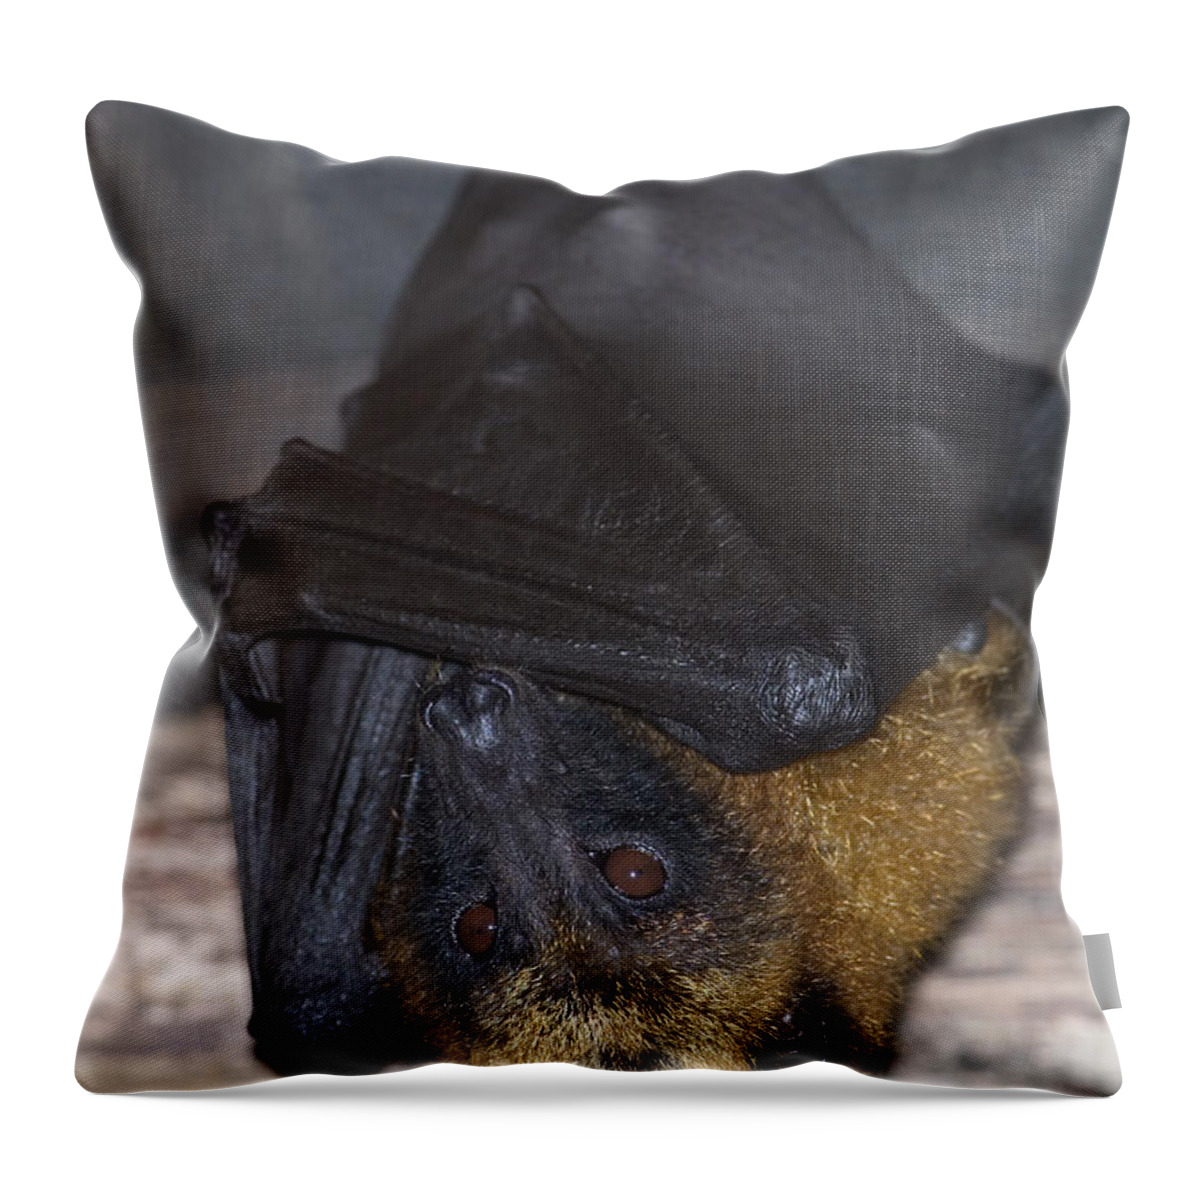 Animal Throw Pillow featuring the photograph Madagascar Flying Fox by Gregory G. Dimijian